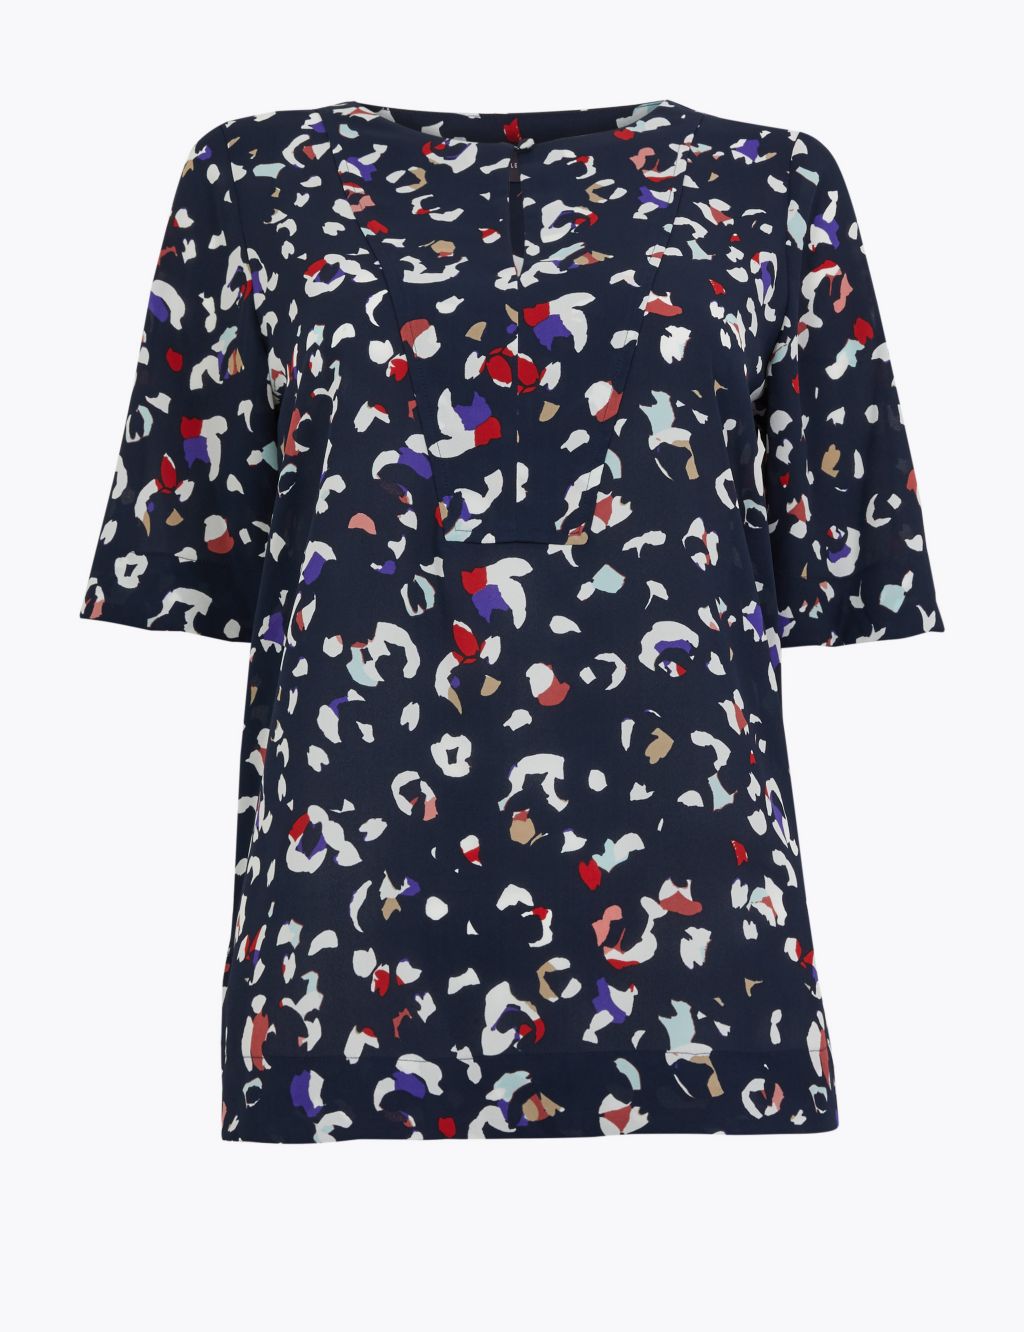 Printed Blouse | M&S Collection | M&S